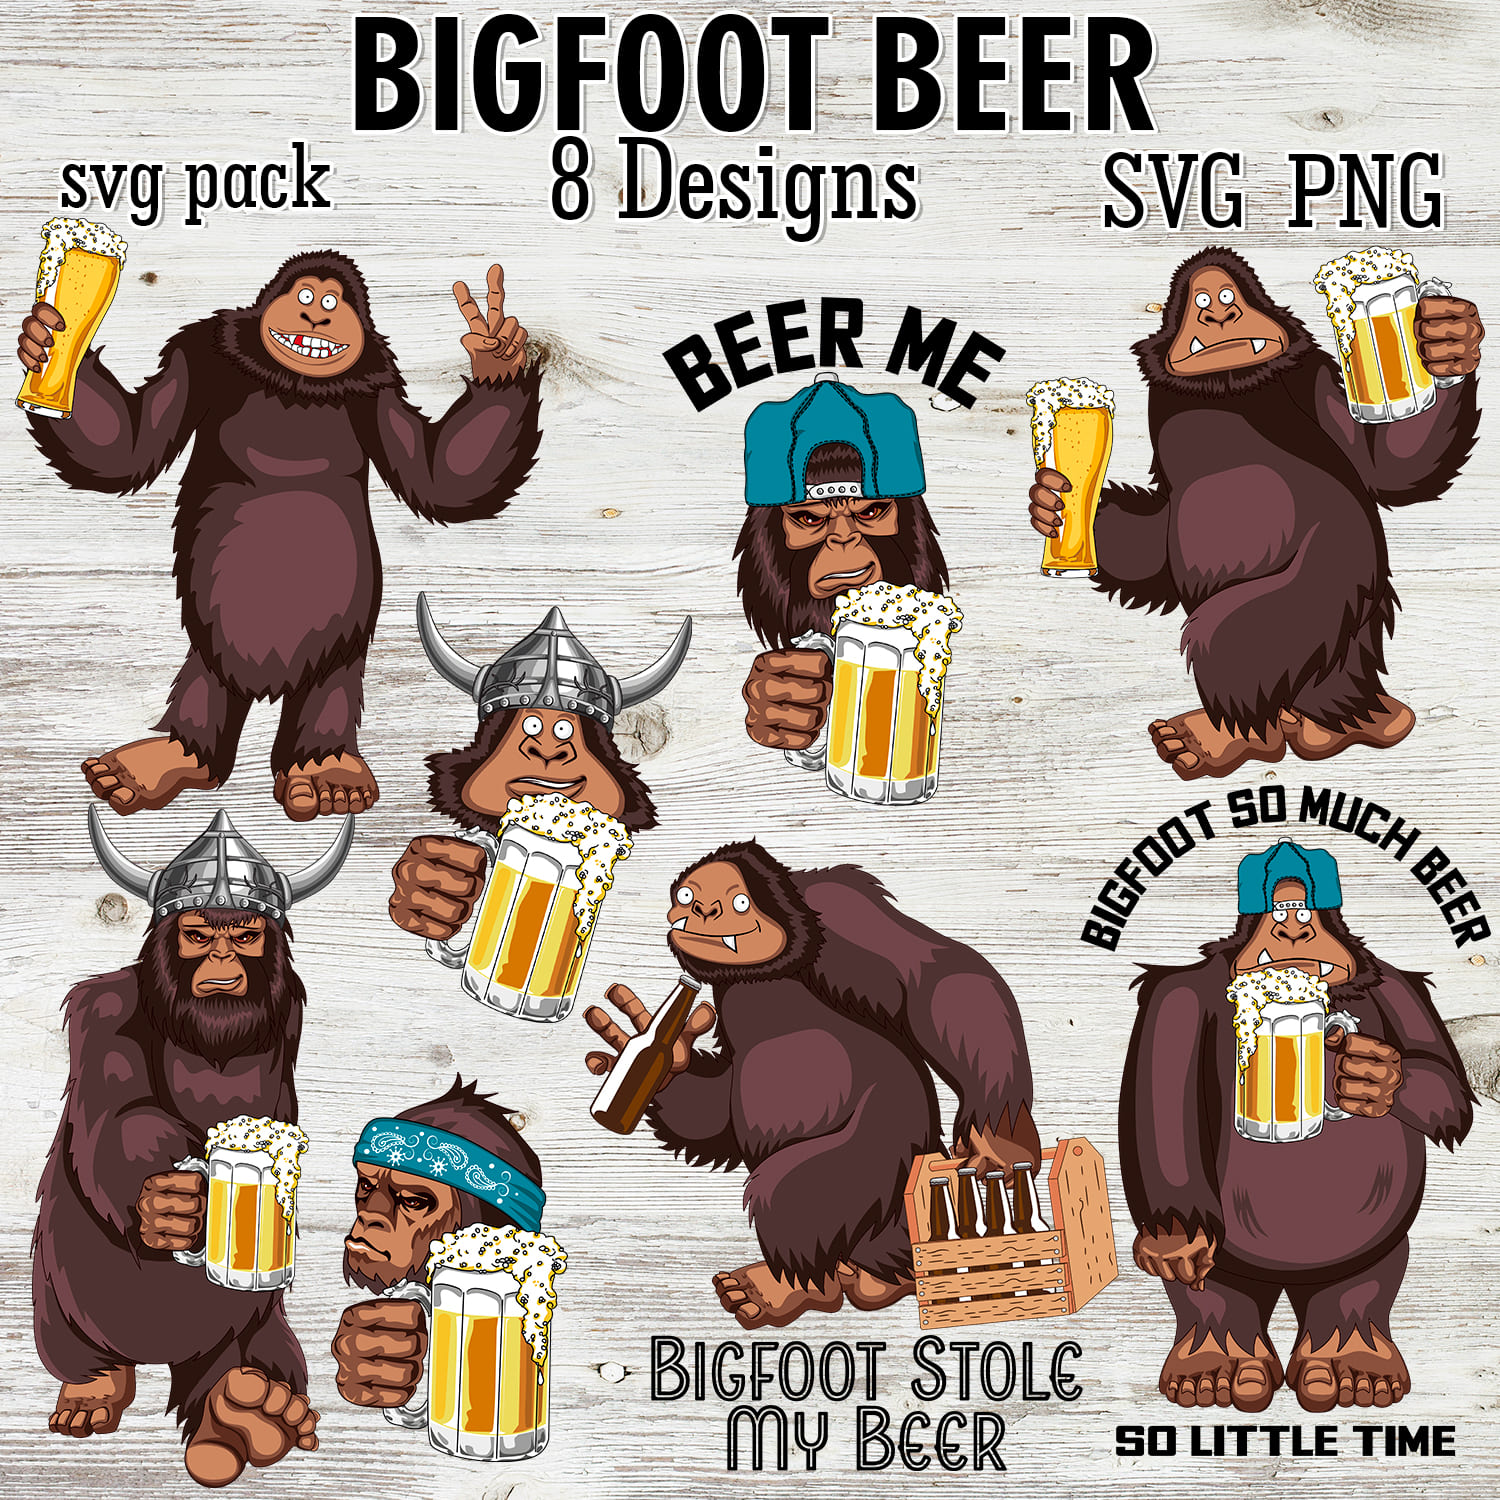 Bunch of bigfoots are holding beers.